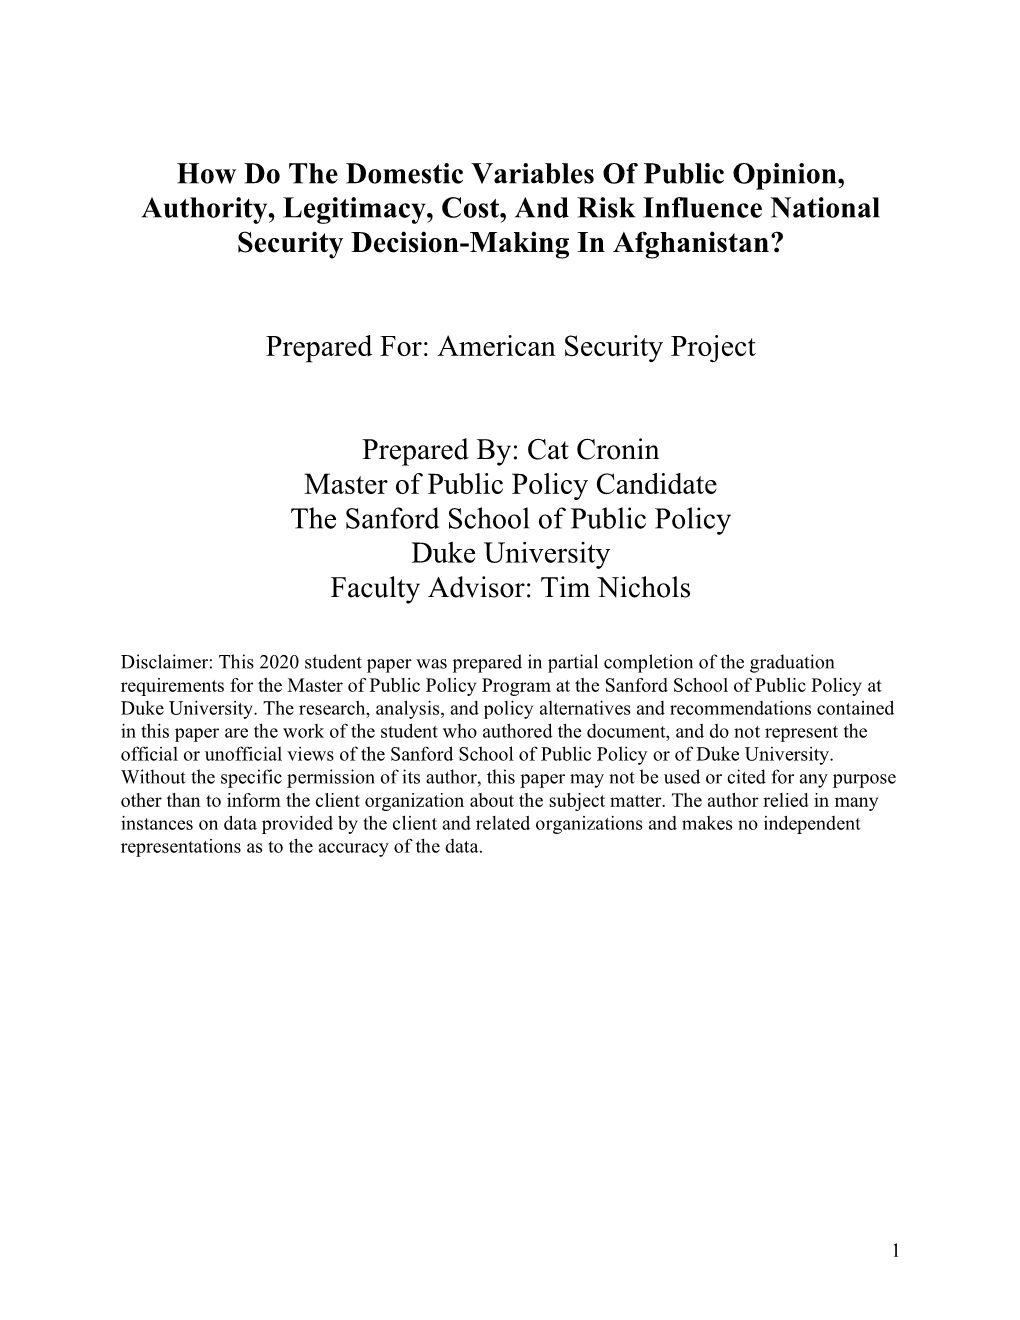 How Do the Domestic Variables of Public Opinion, Authority, Legitimacy, Cost, and Risk Influence National Security Decision-Making in Afghanistan?